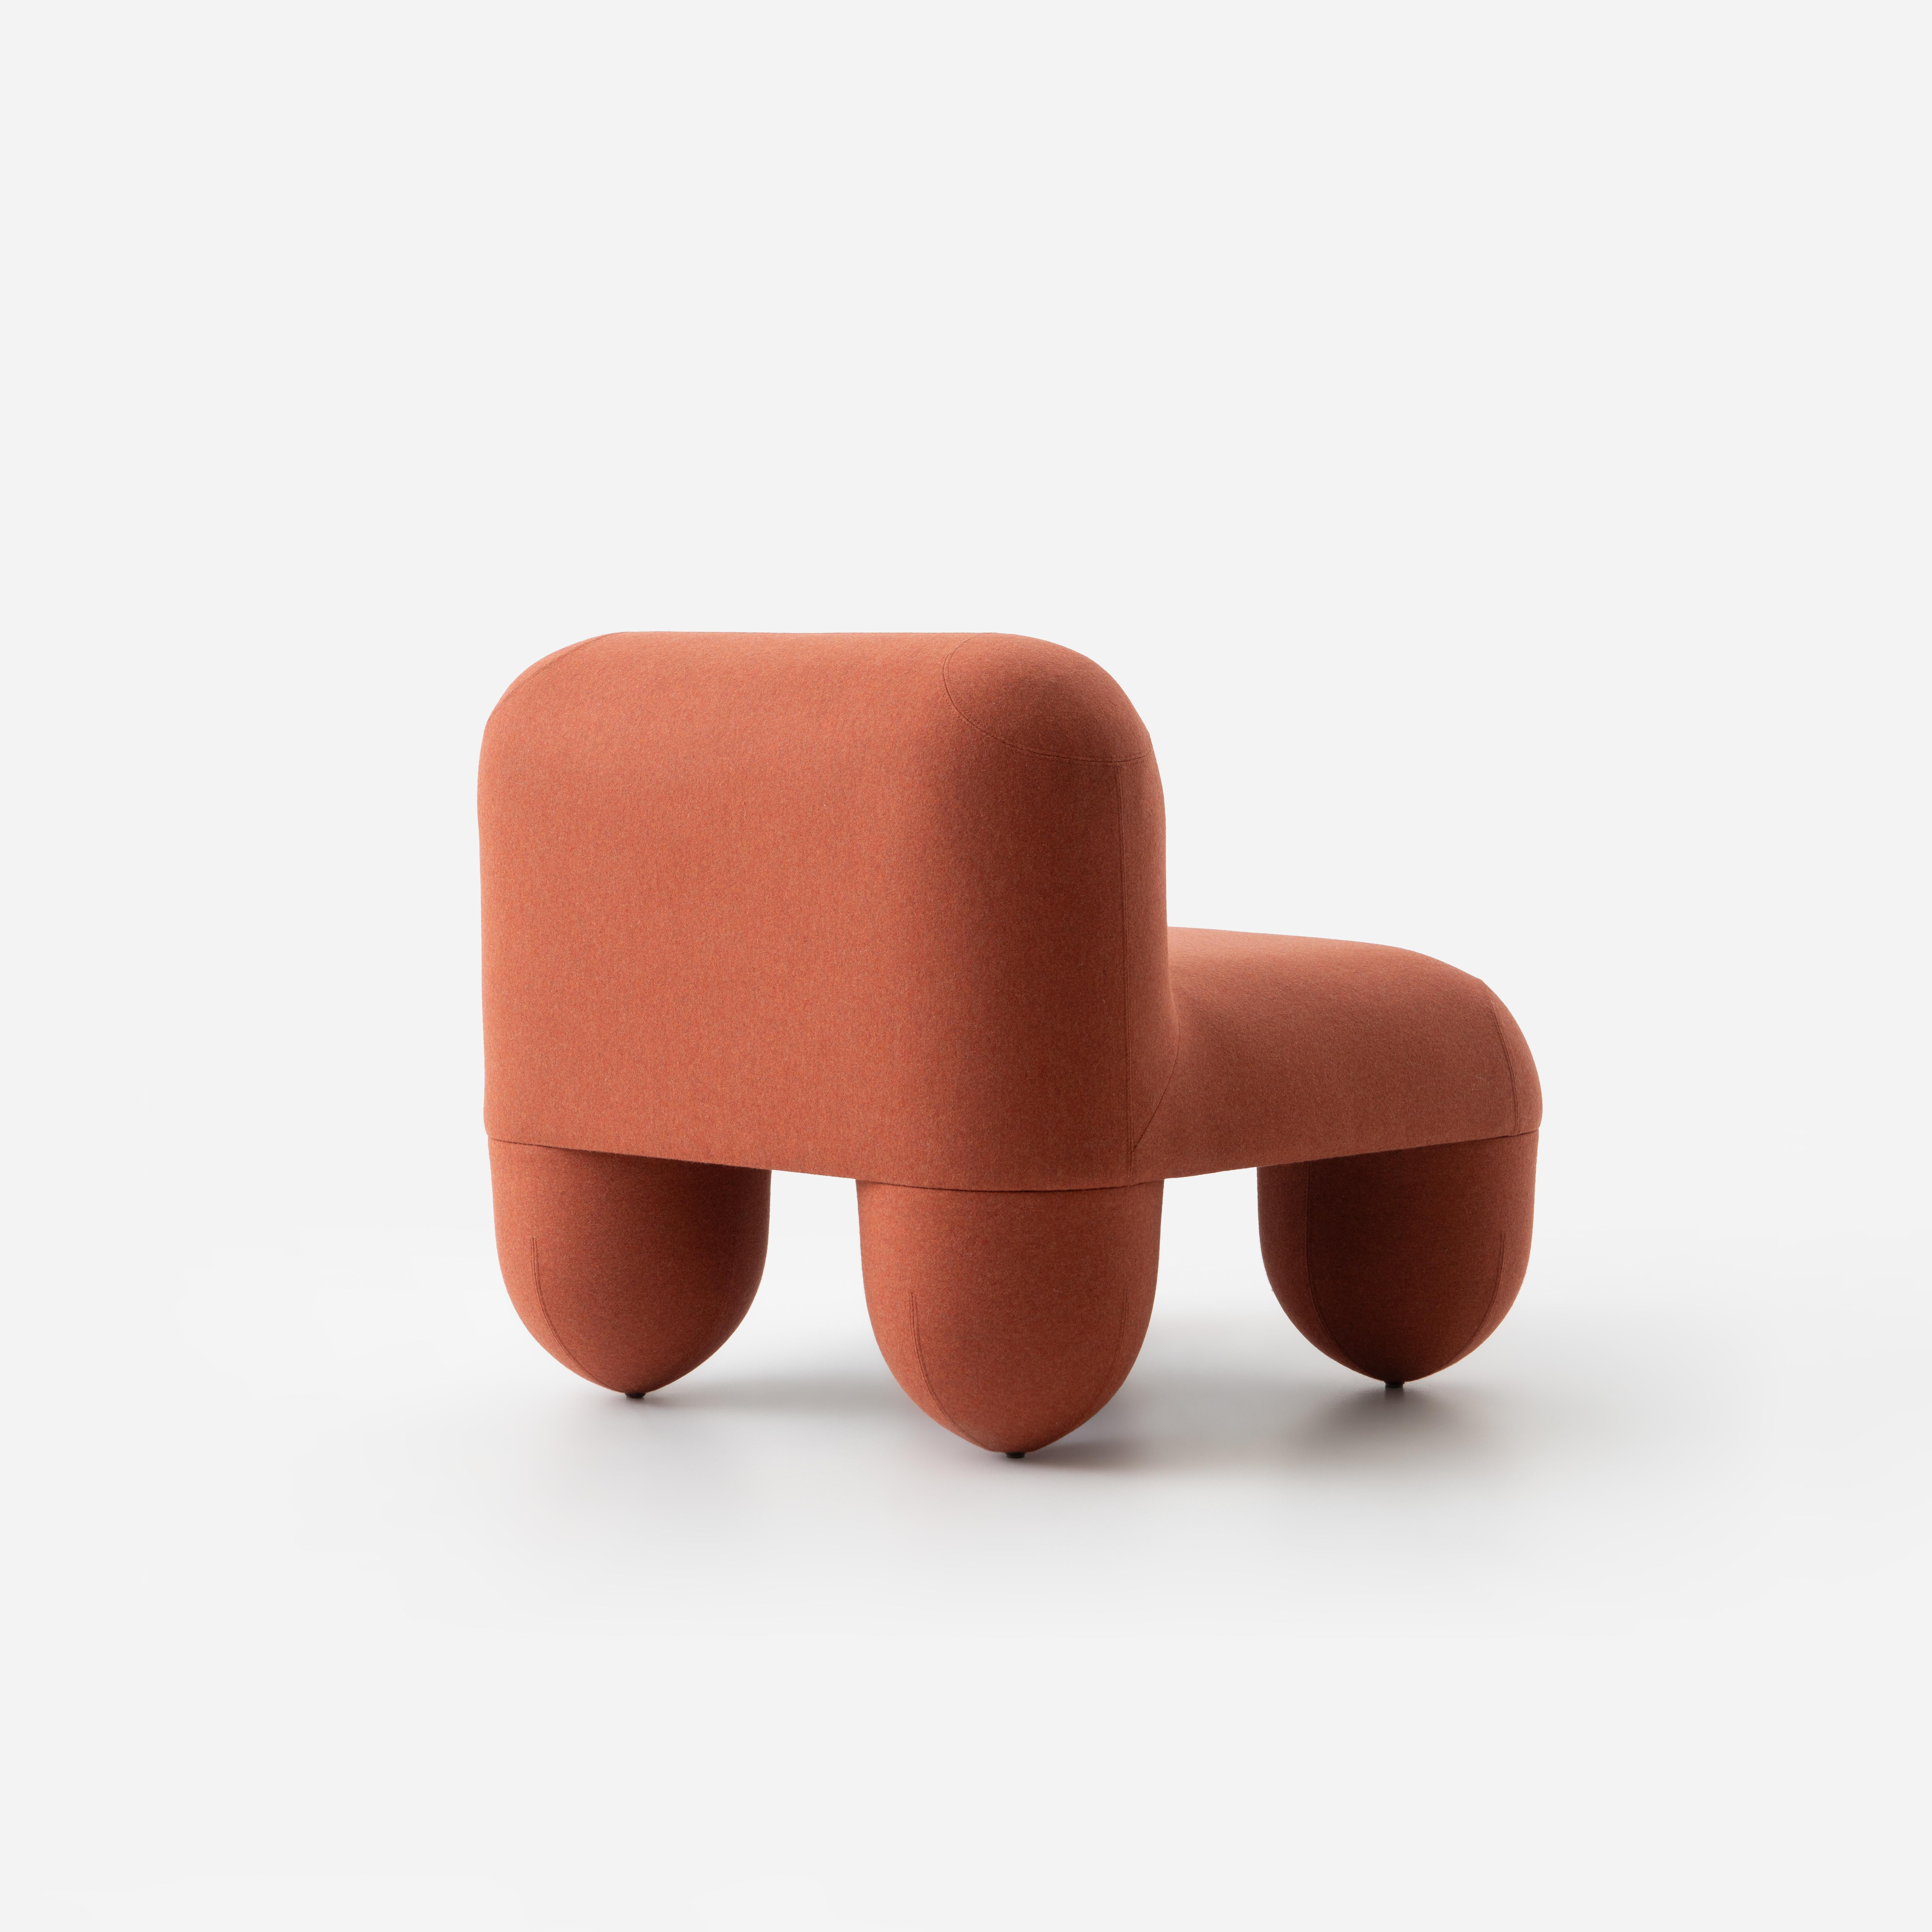 Contemporary Low Chair 'Hello' by Denys Sokolov x Noom, Orange For Sale 4